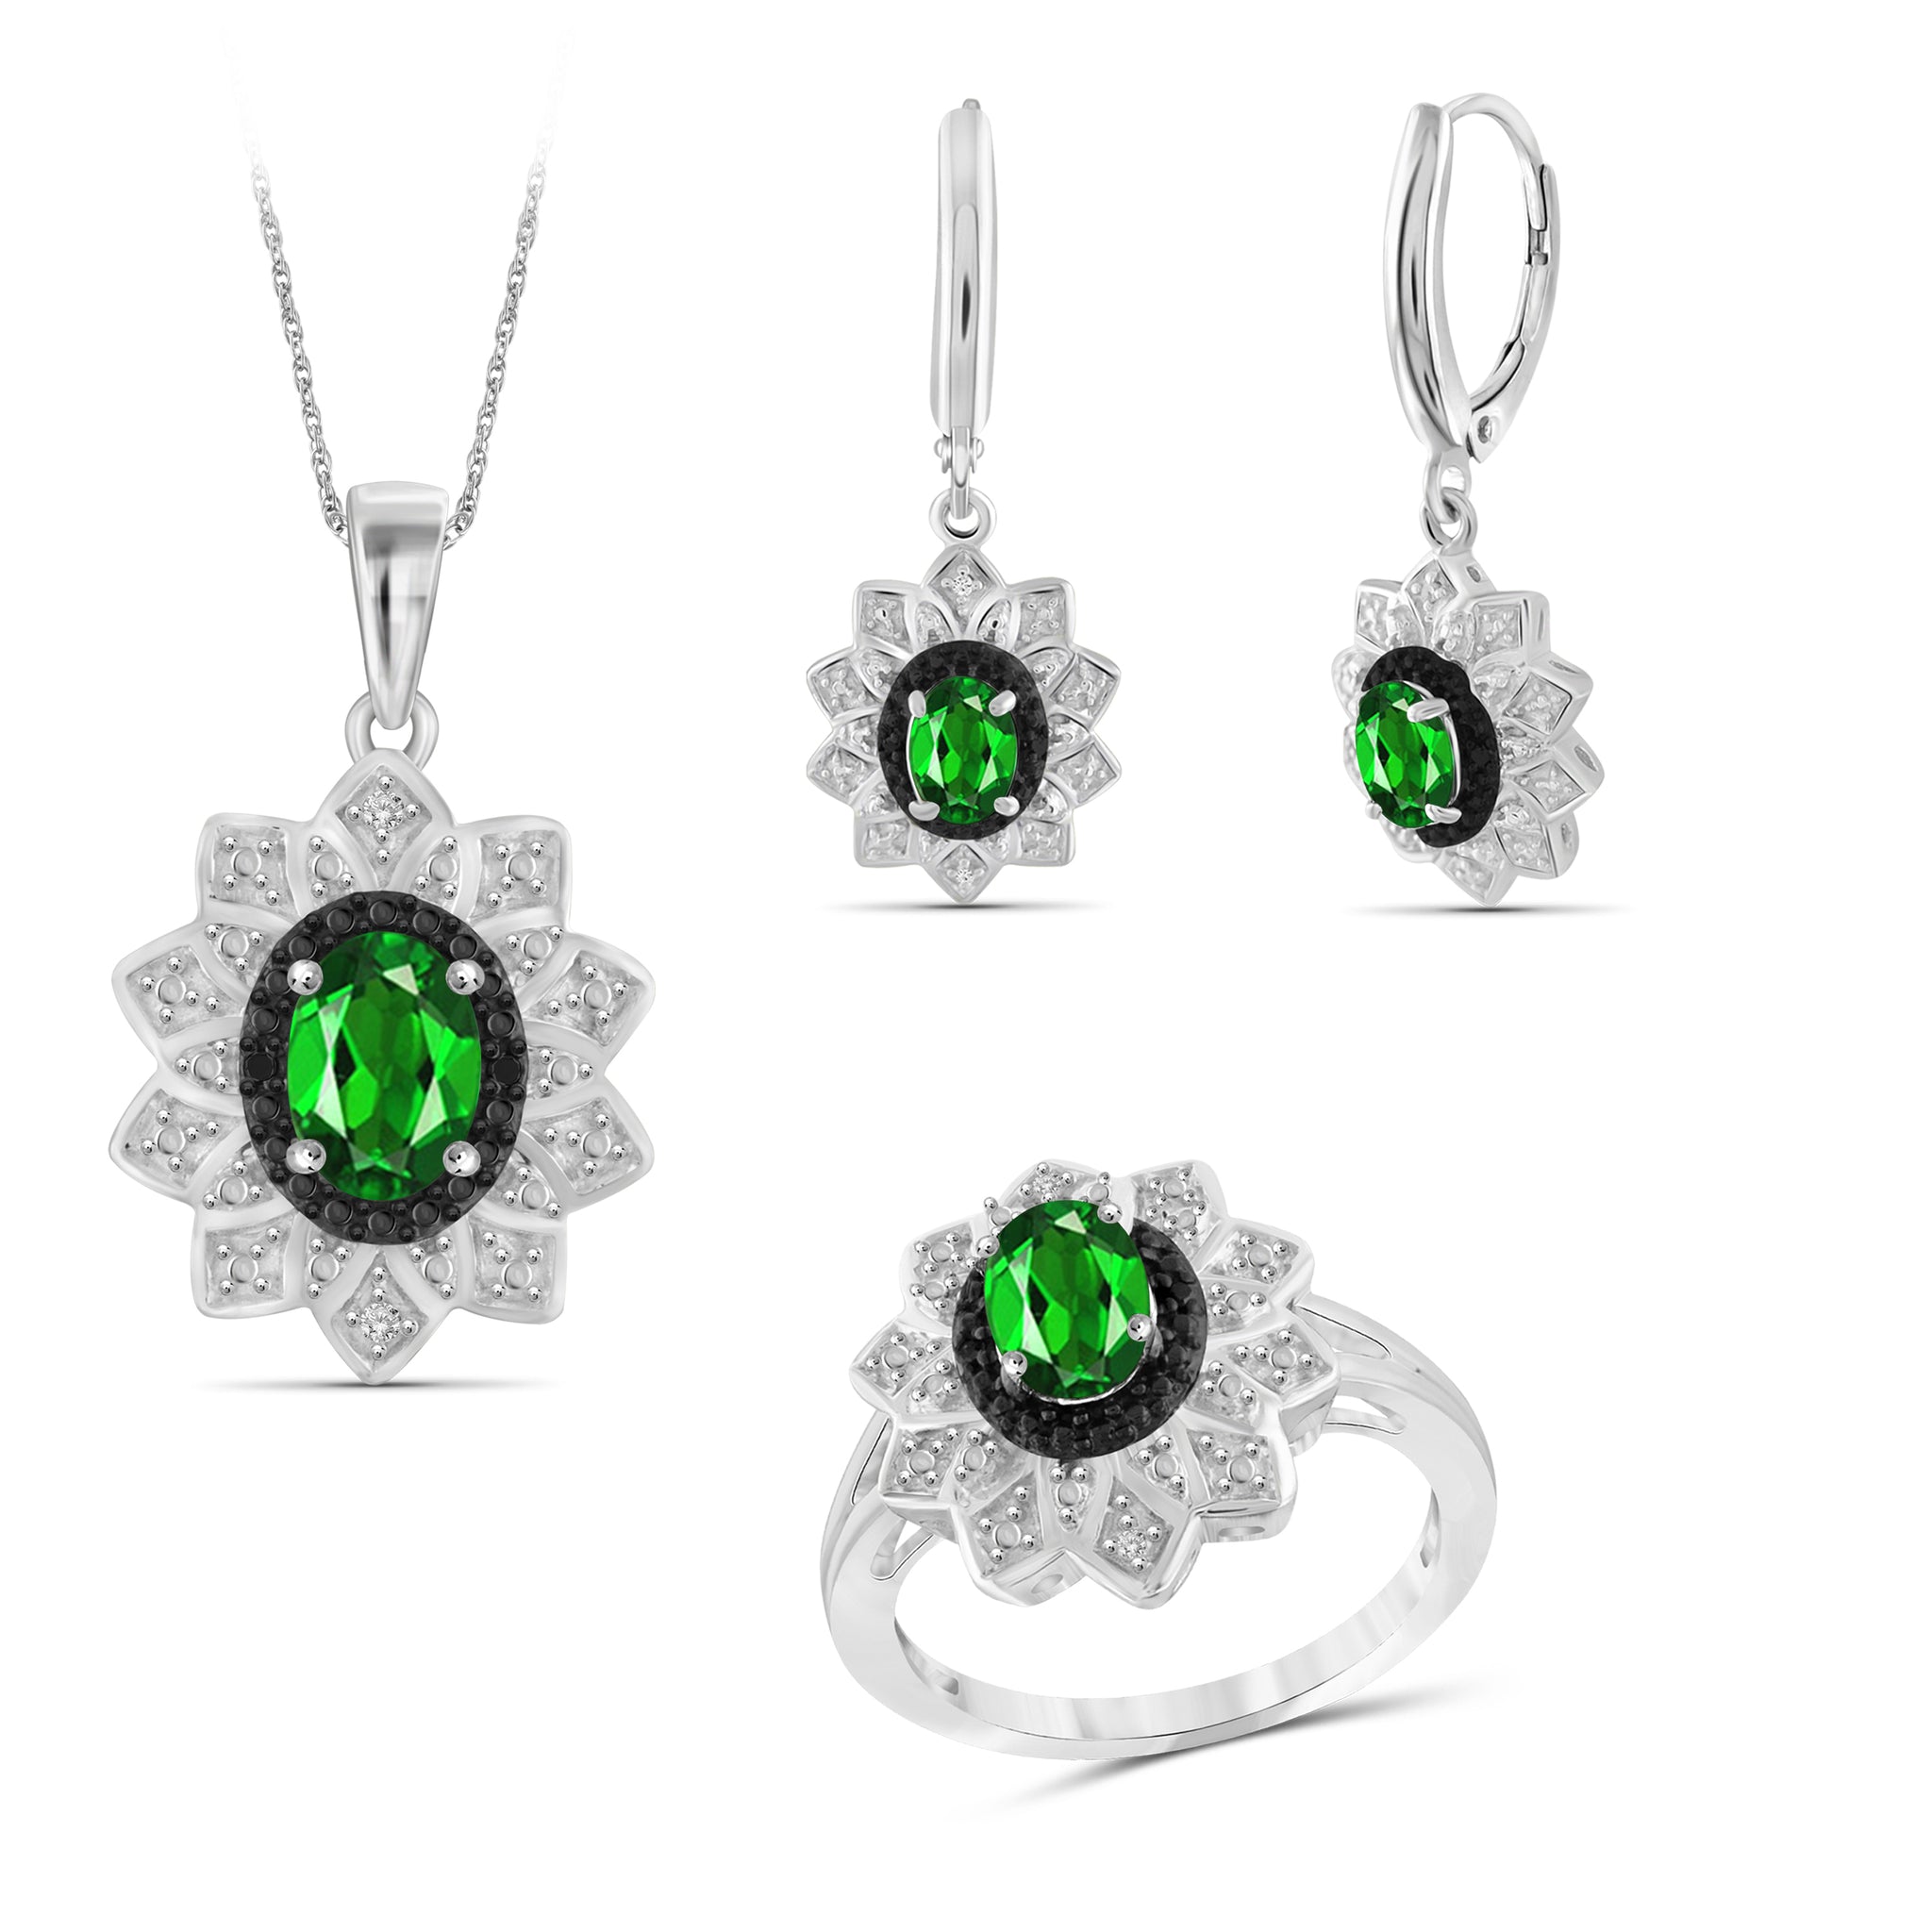 JewelonFire 2.70 Carat T.G.W. Chrome Diopside And 1/10 Carat T.W. Black & White Diamond Sterling Silver 3 Piece Jewelry Set - Assorted Colors